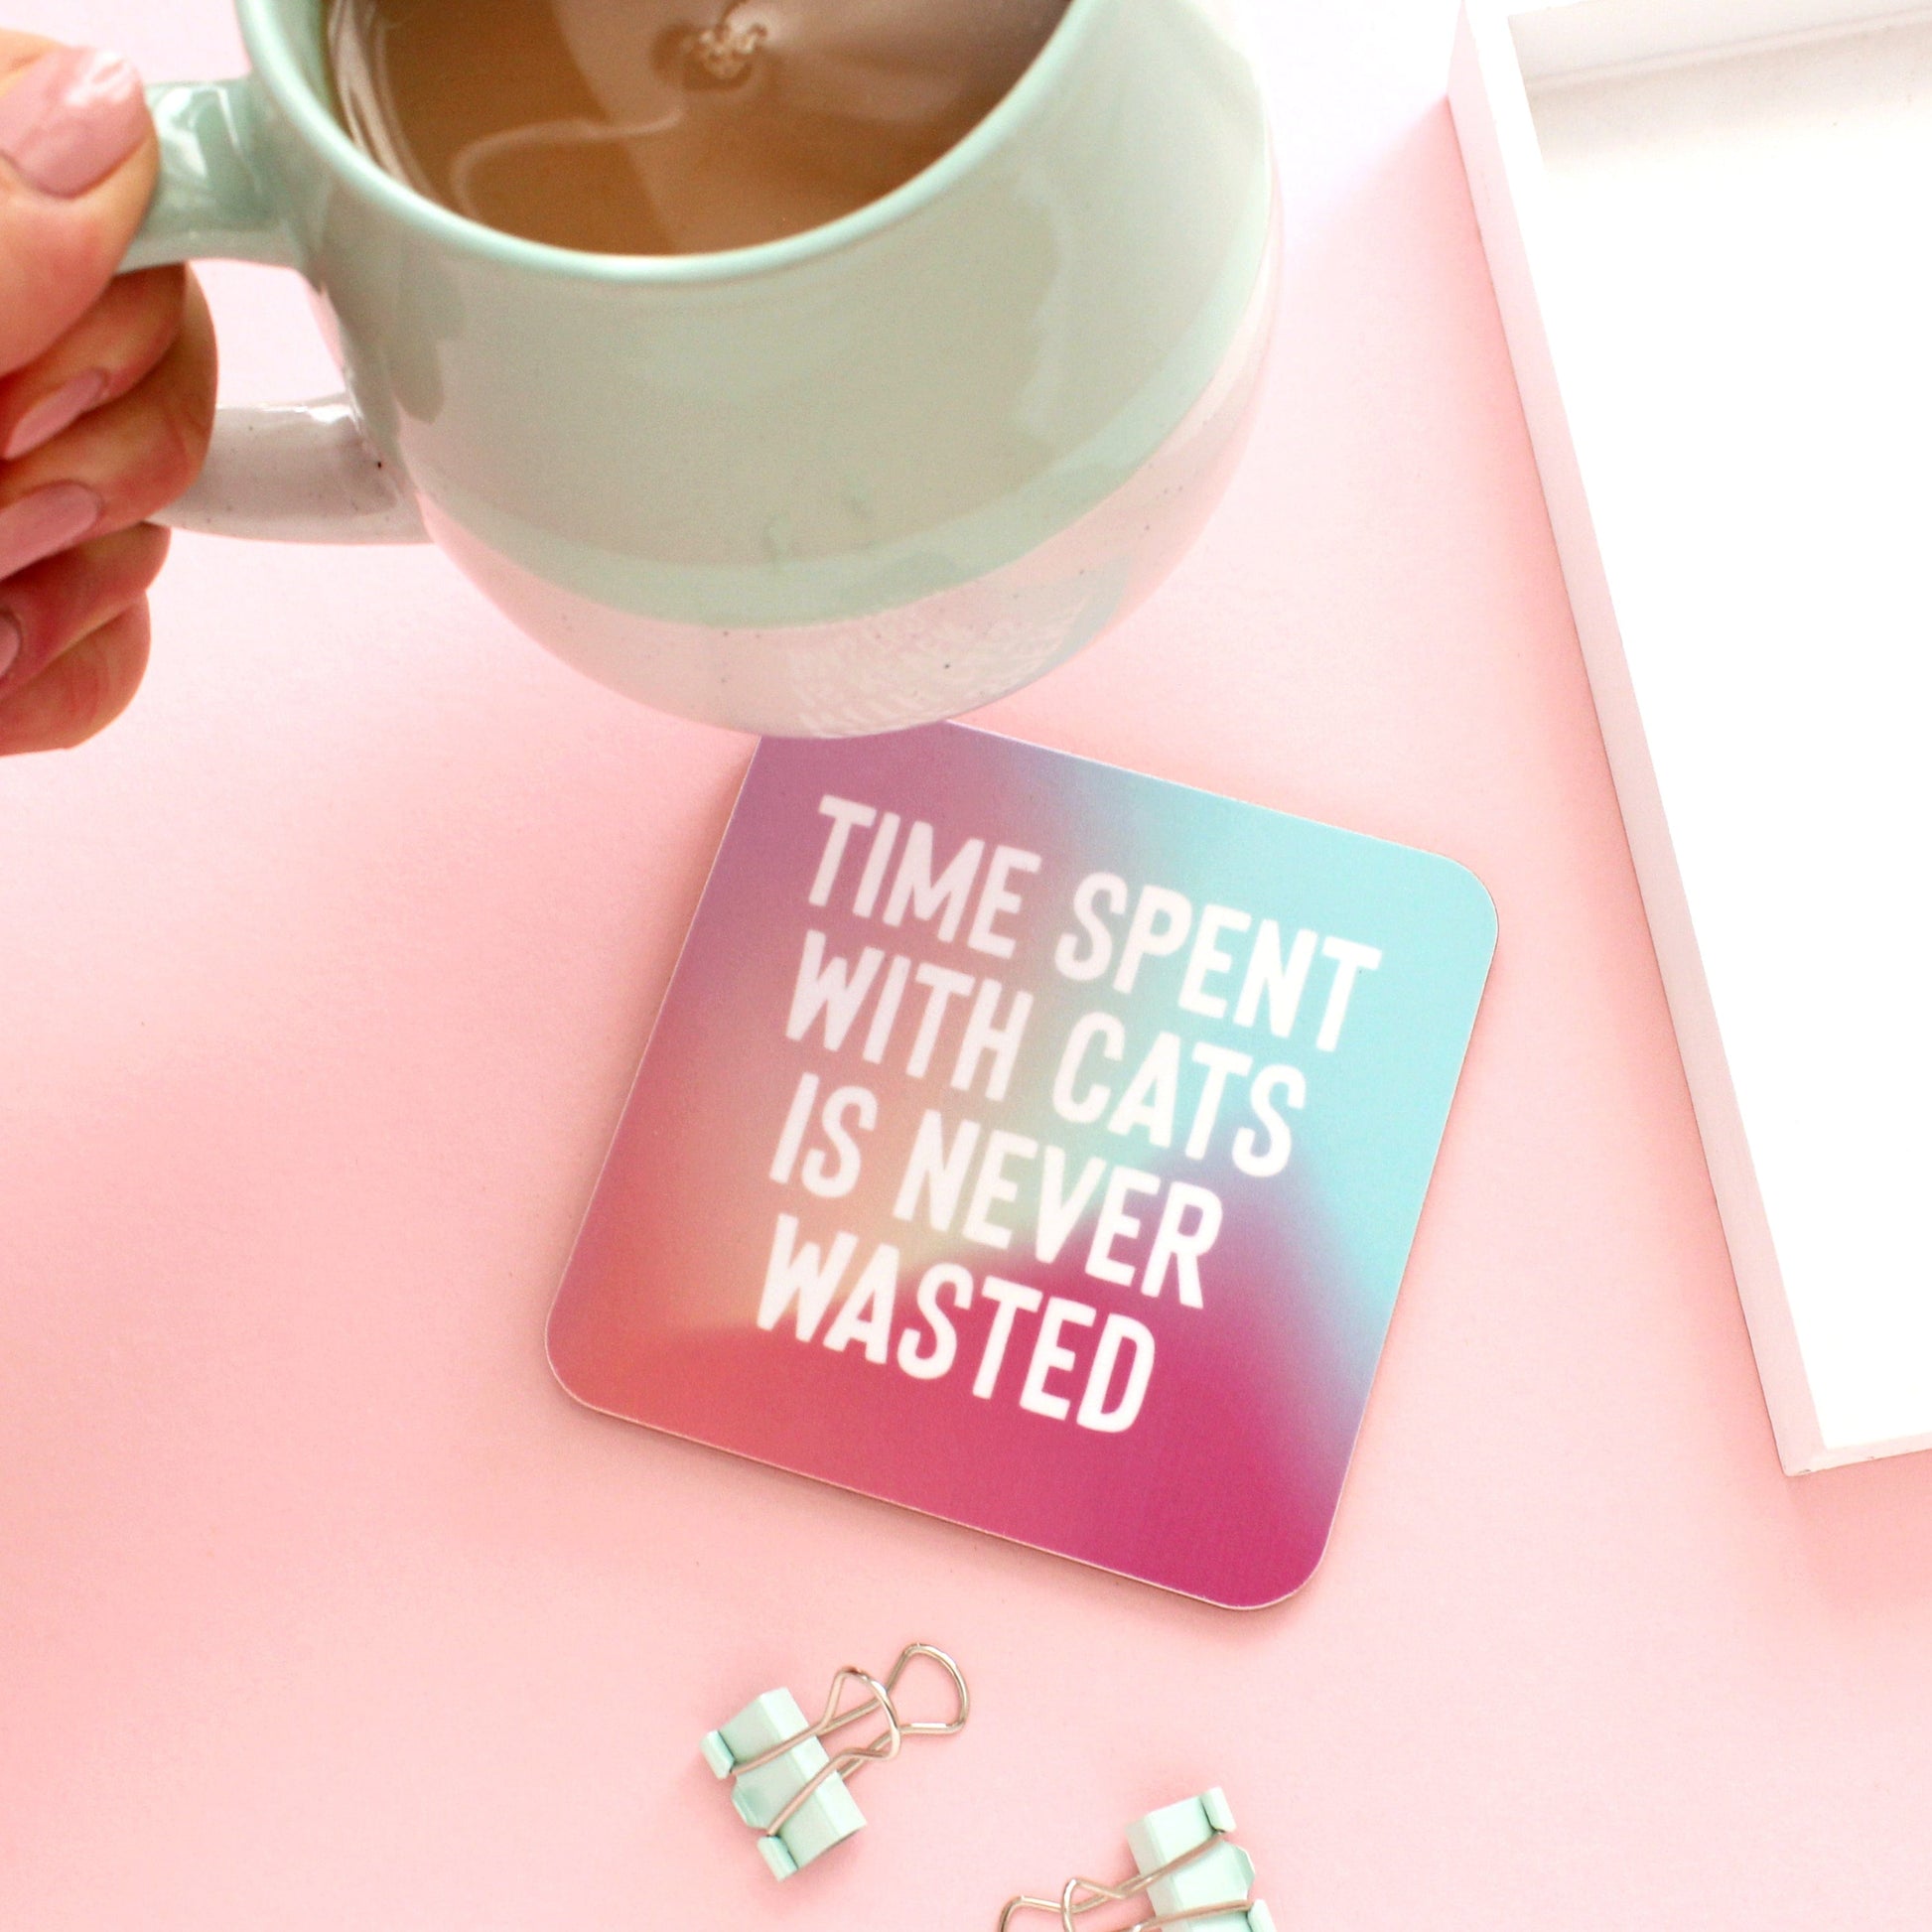 Time spent with cats is never wasted coaster from Purple Tree Designs